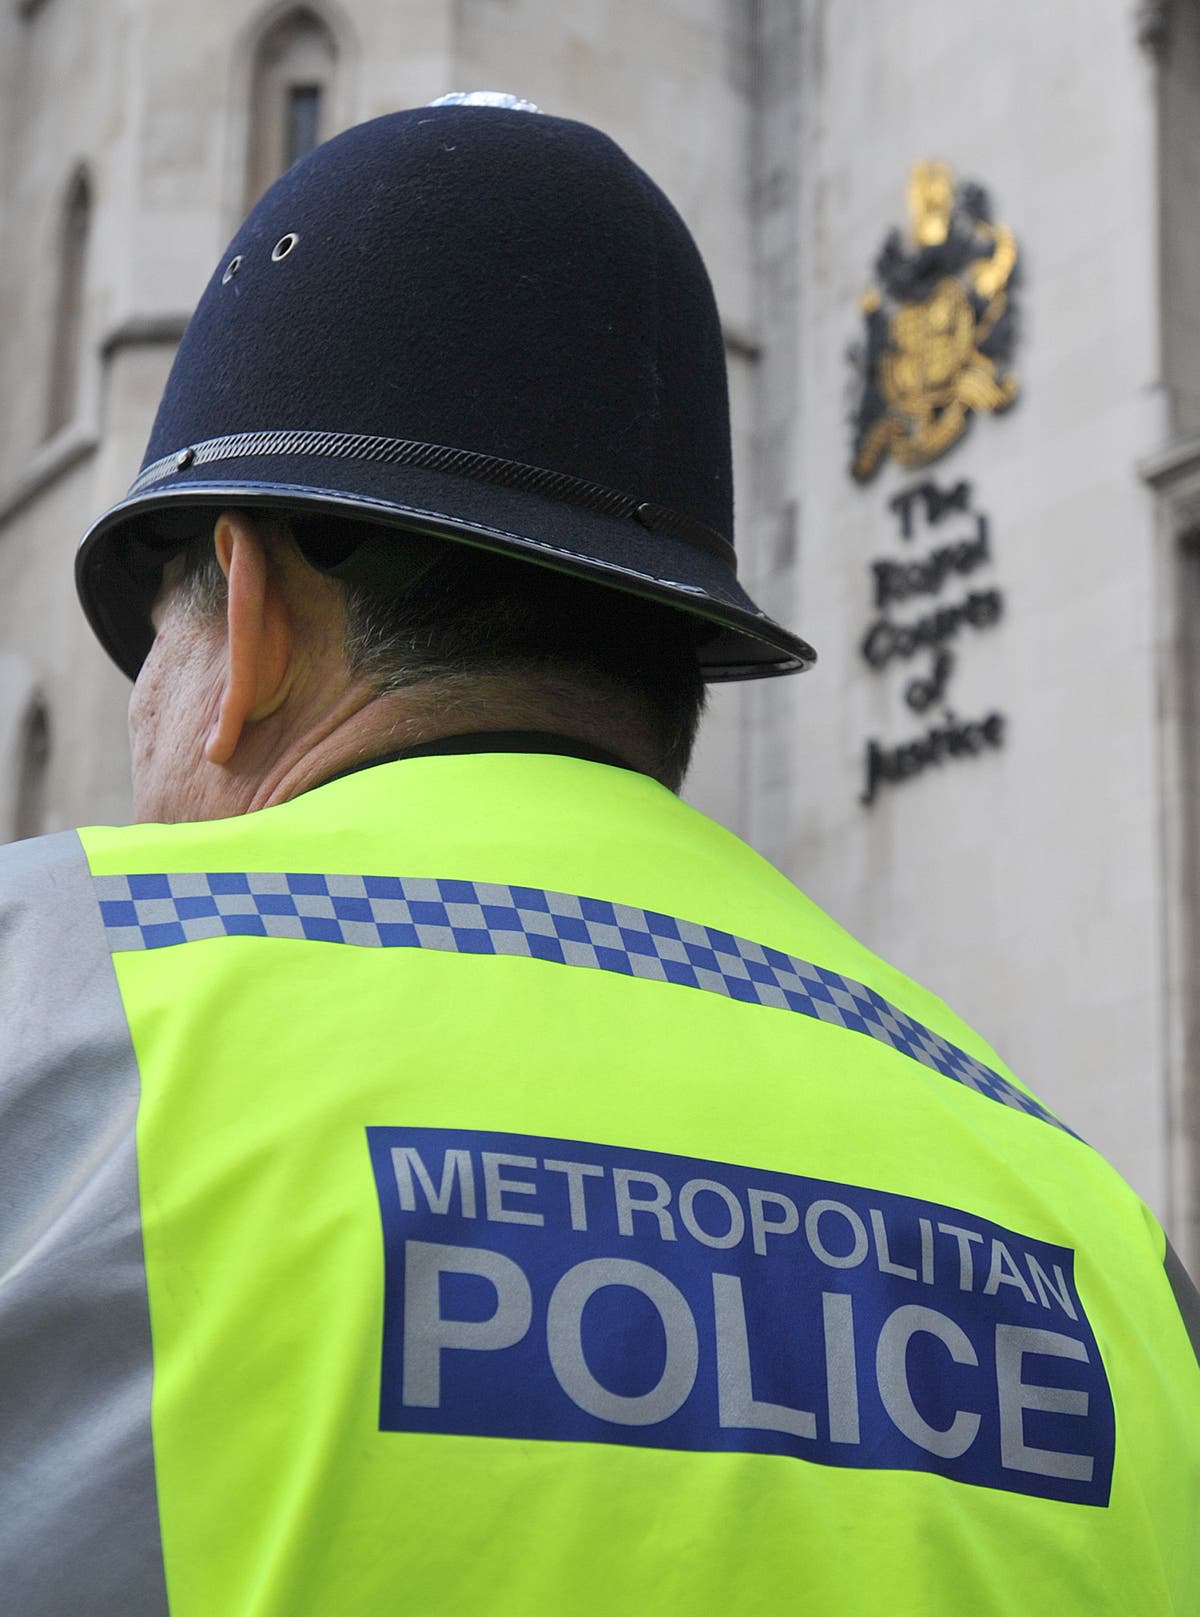 Man to appear in court after air pistol pointed at police officer in Camden